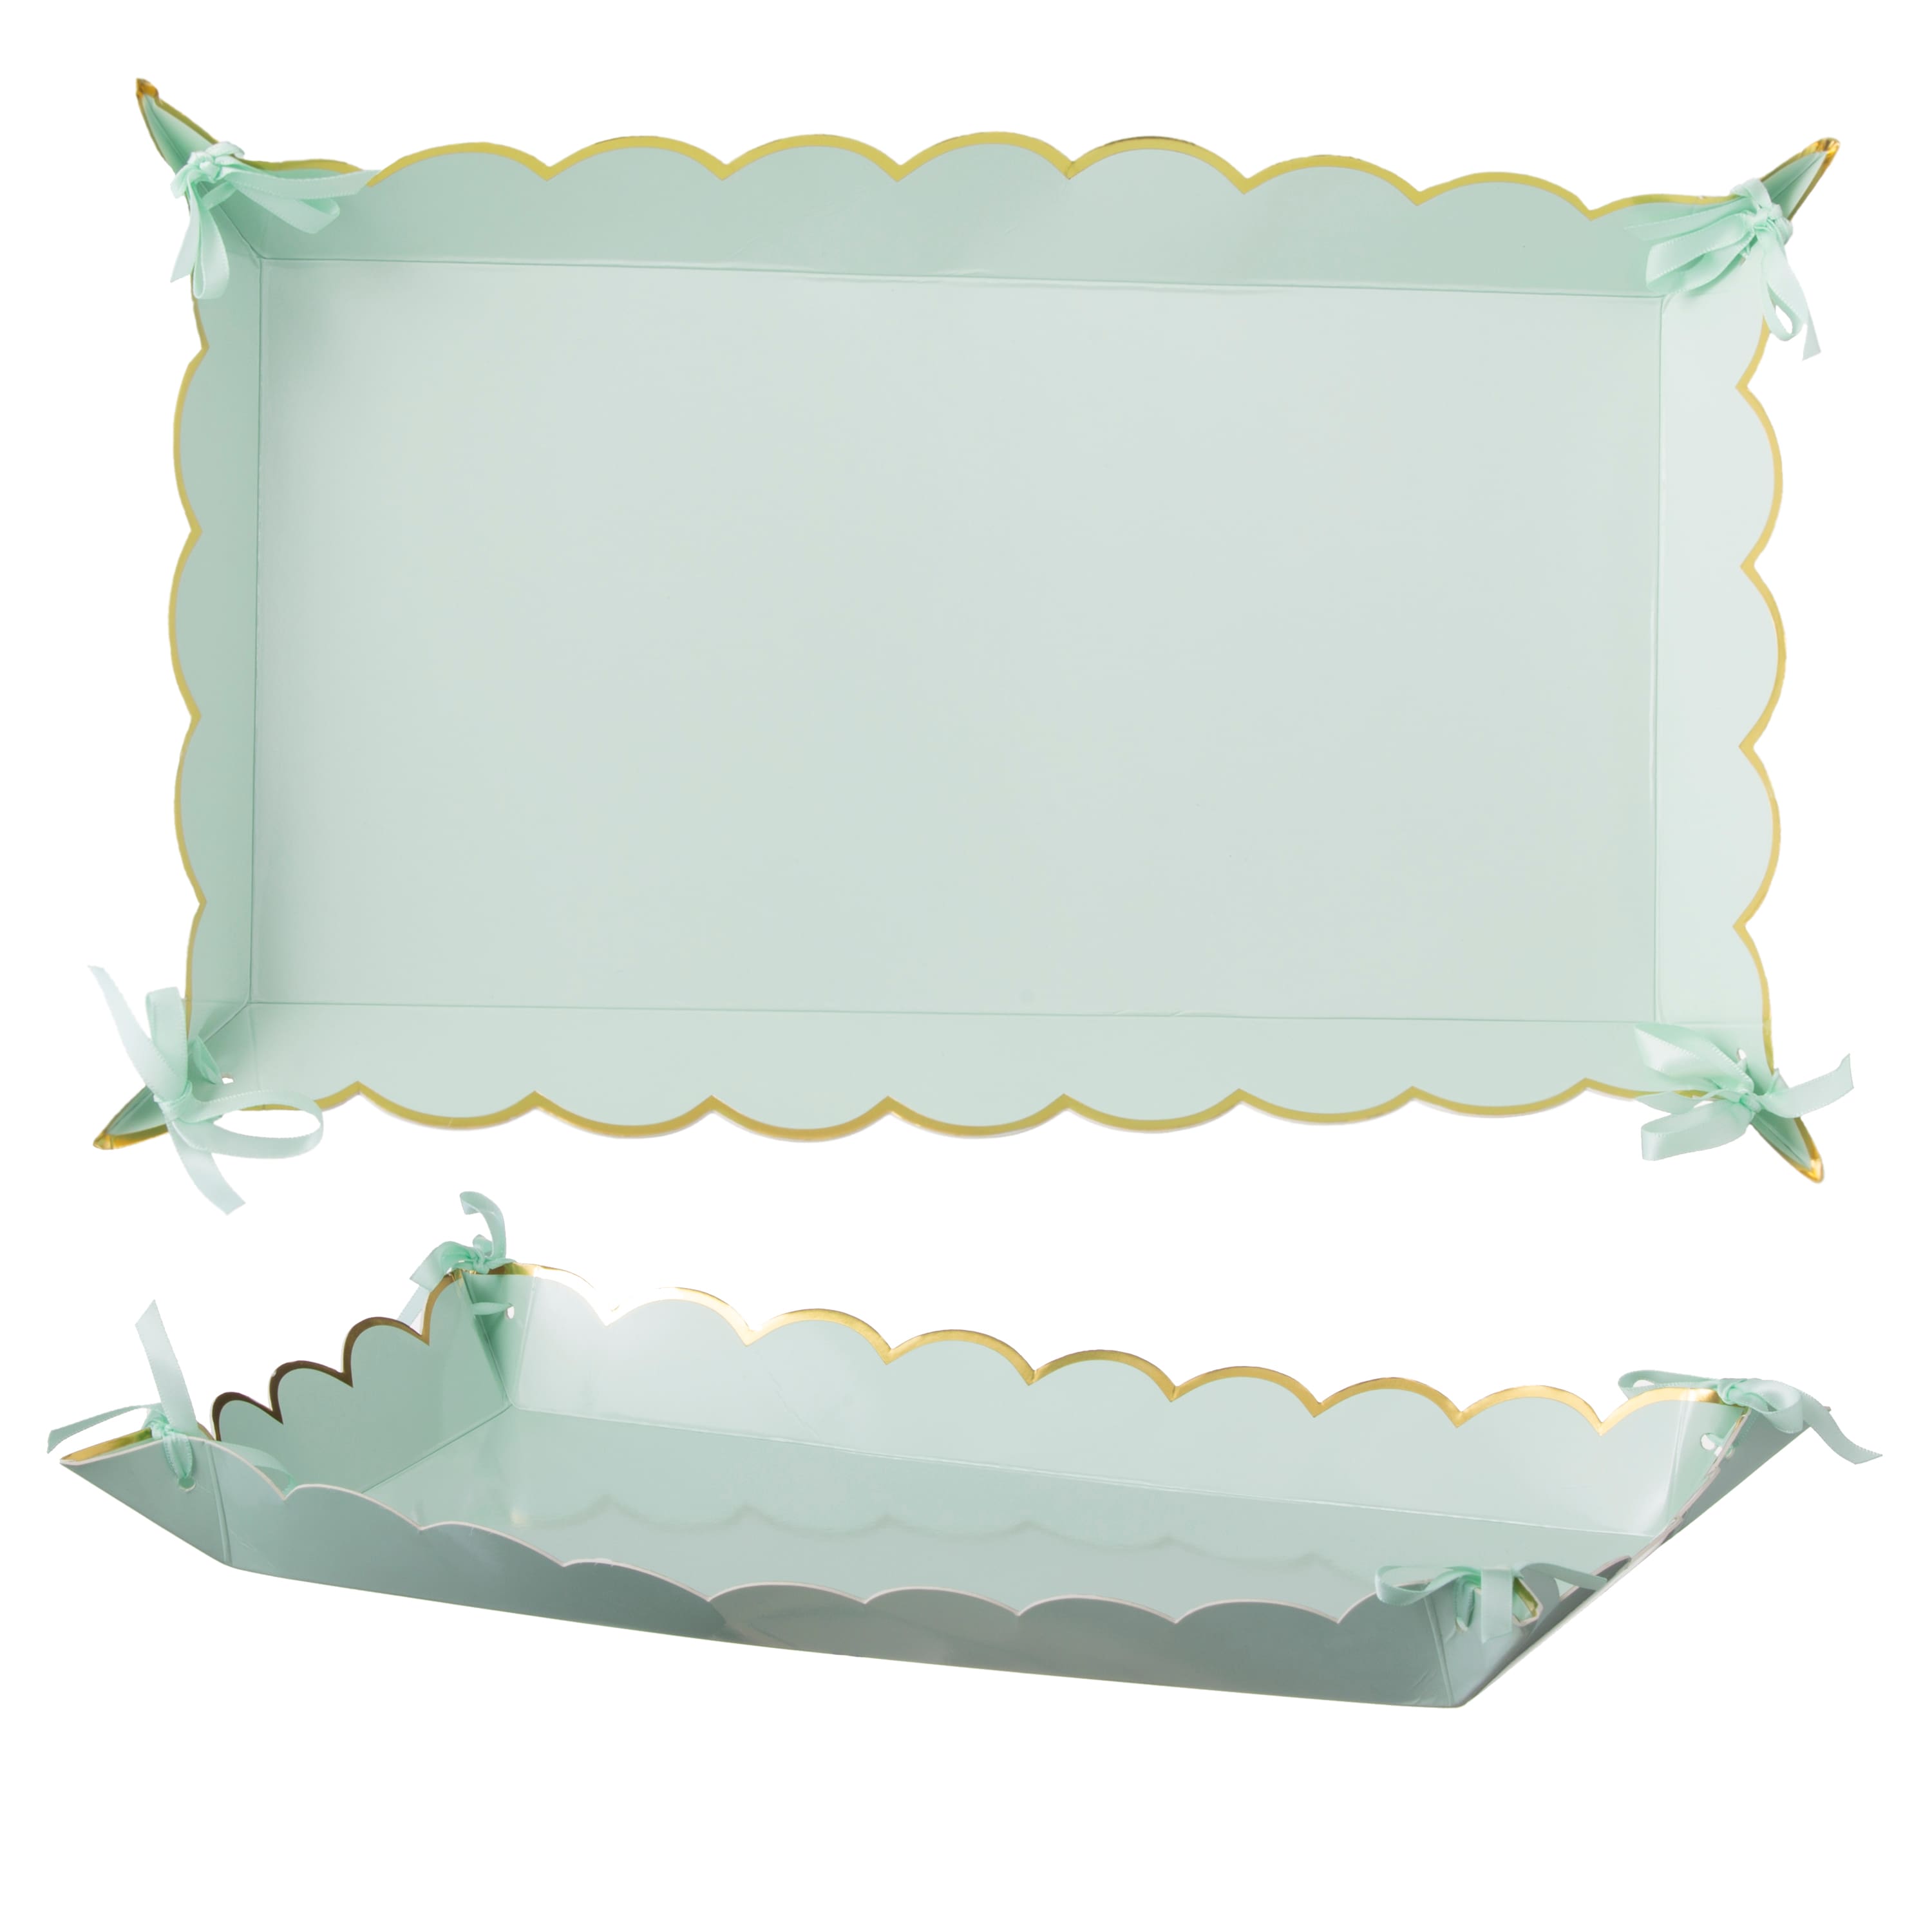 Shop For The Martha Stewart Mint Paper Trays At Michaels